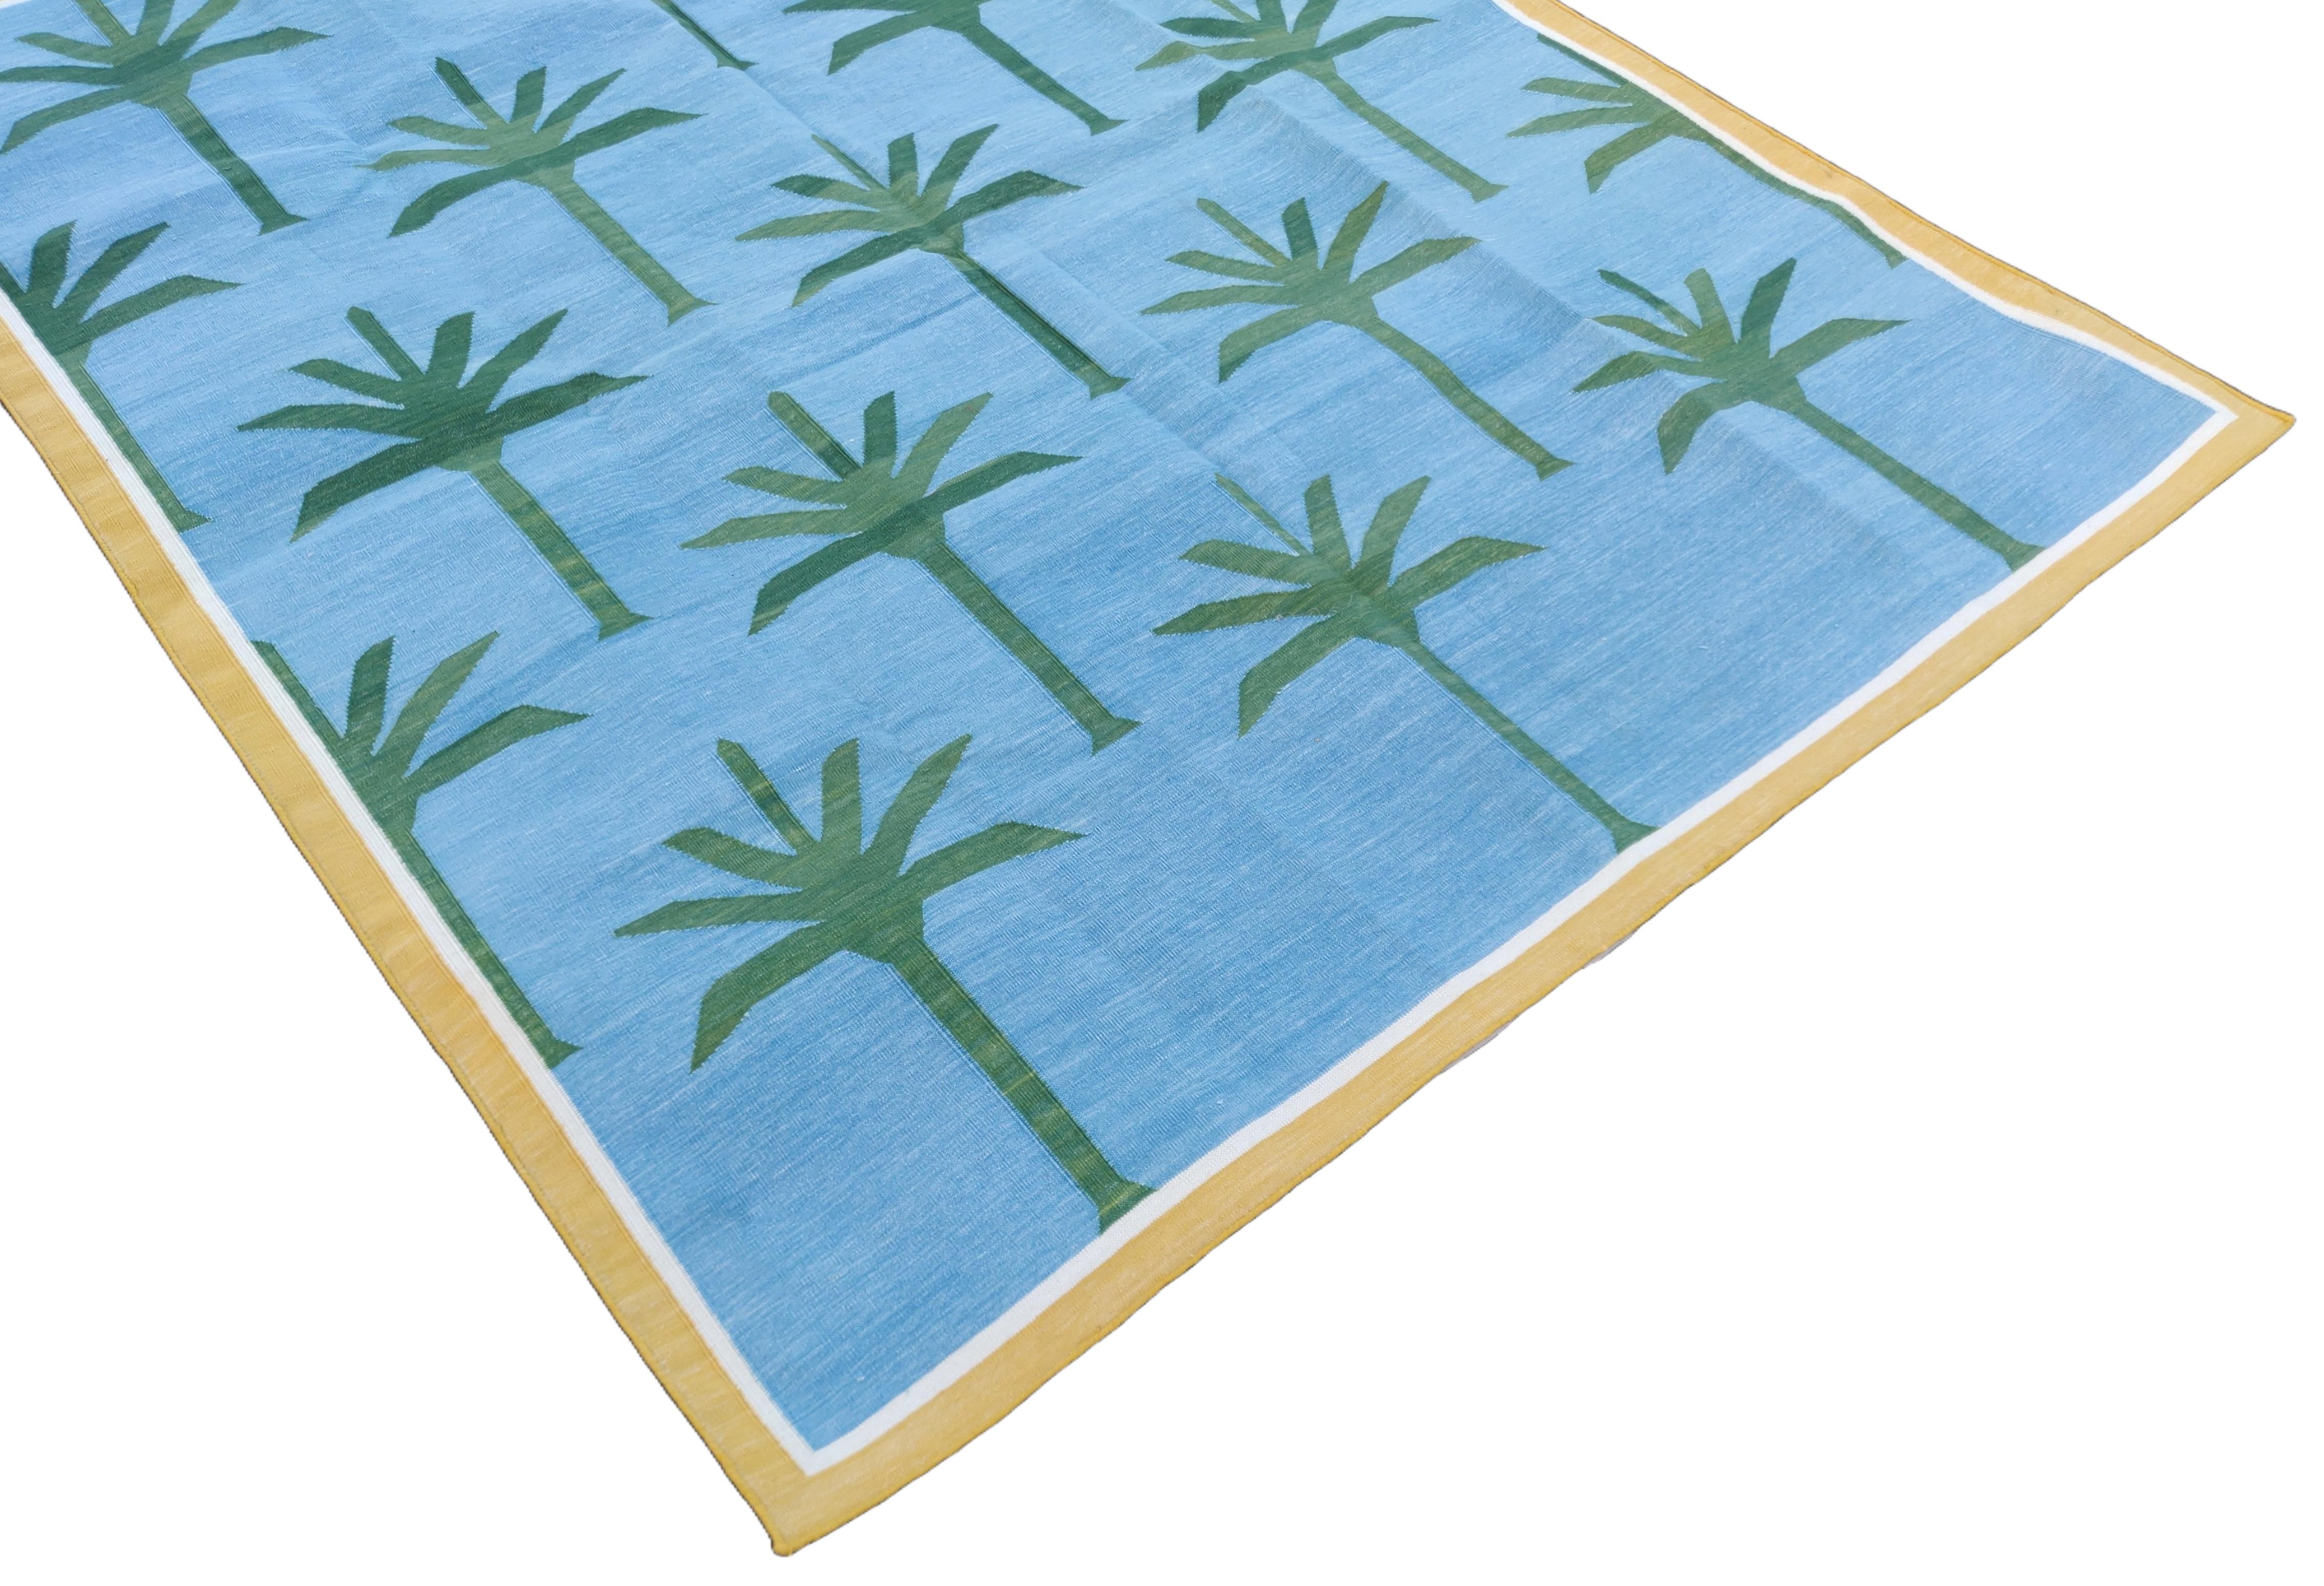 Hand-Woven Handmade Cotton Area Flat Weave Rug, 5x7 Blue And Green Palm Tree Indian Dhurrie For Sale